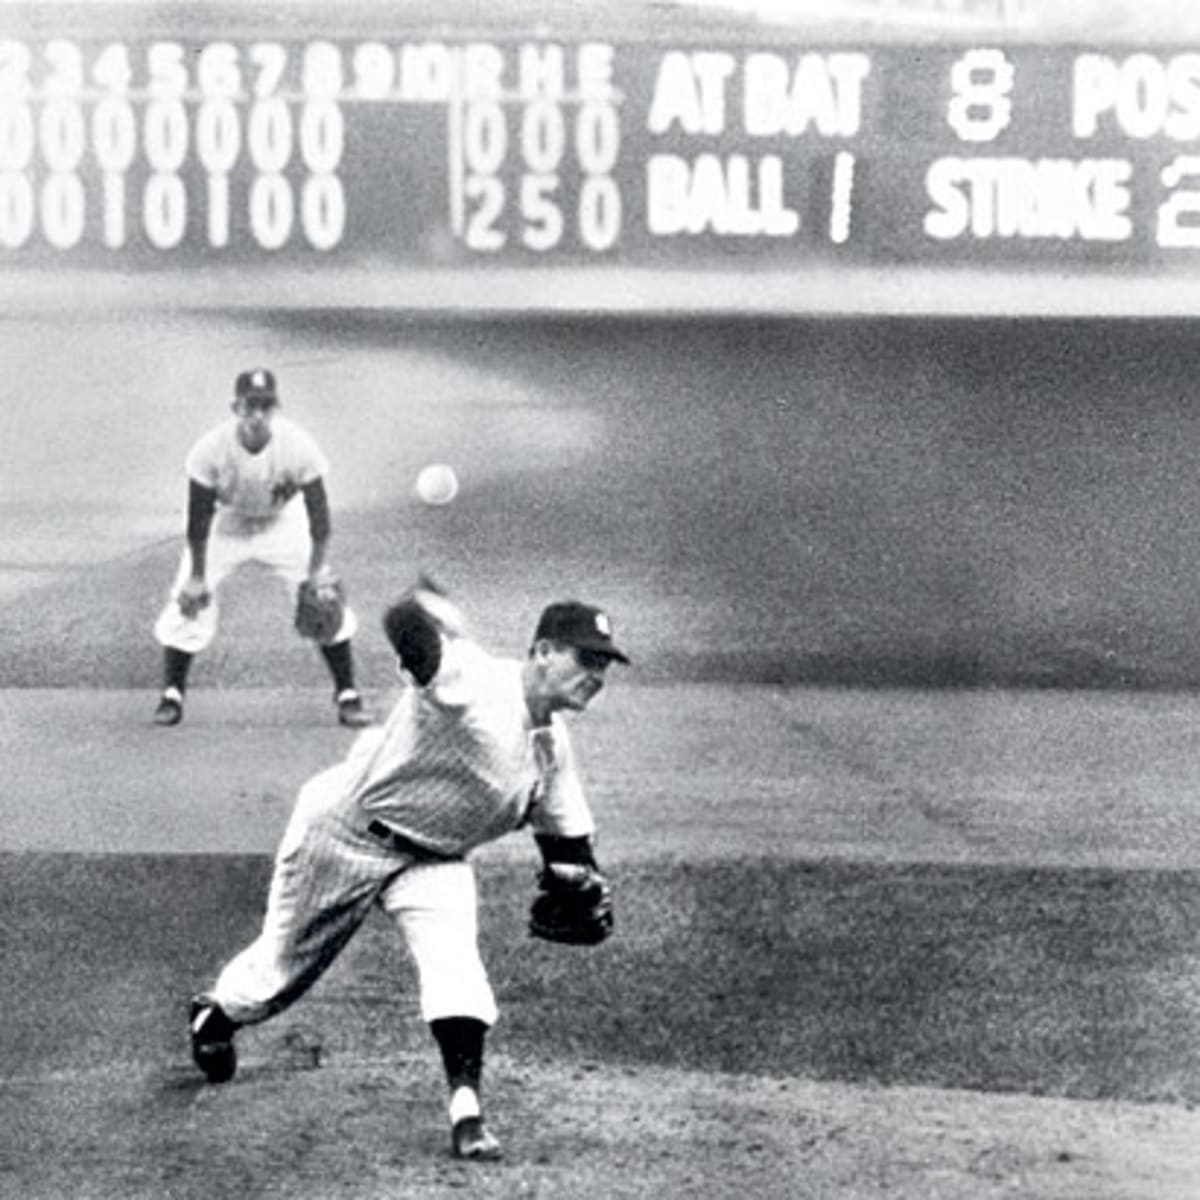 On anniversary of Don Larsen's perfect game, where does it rank